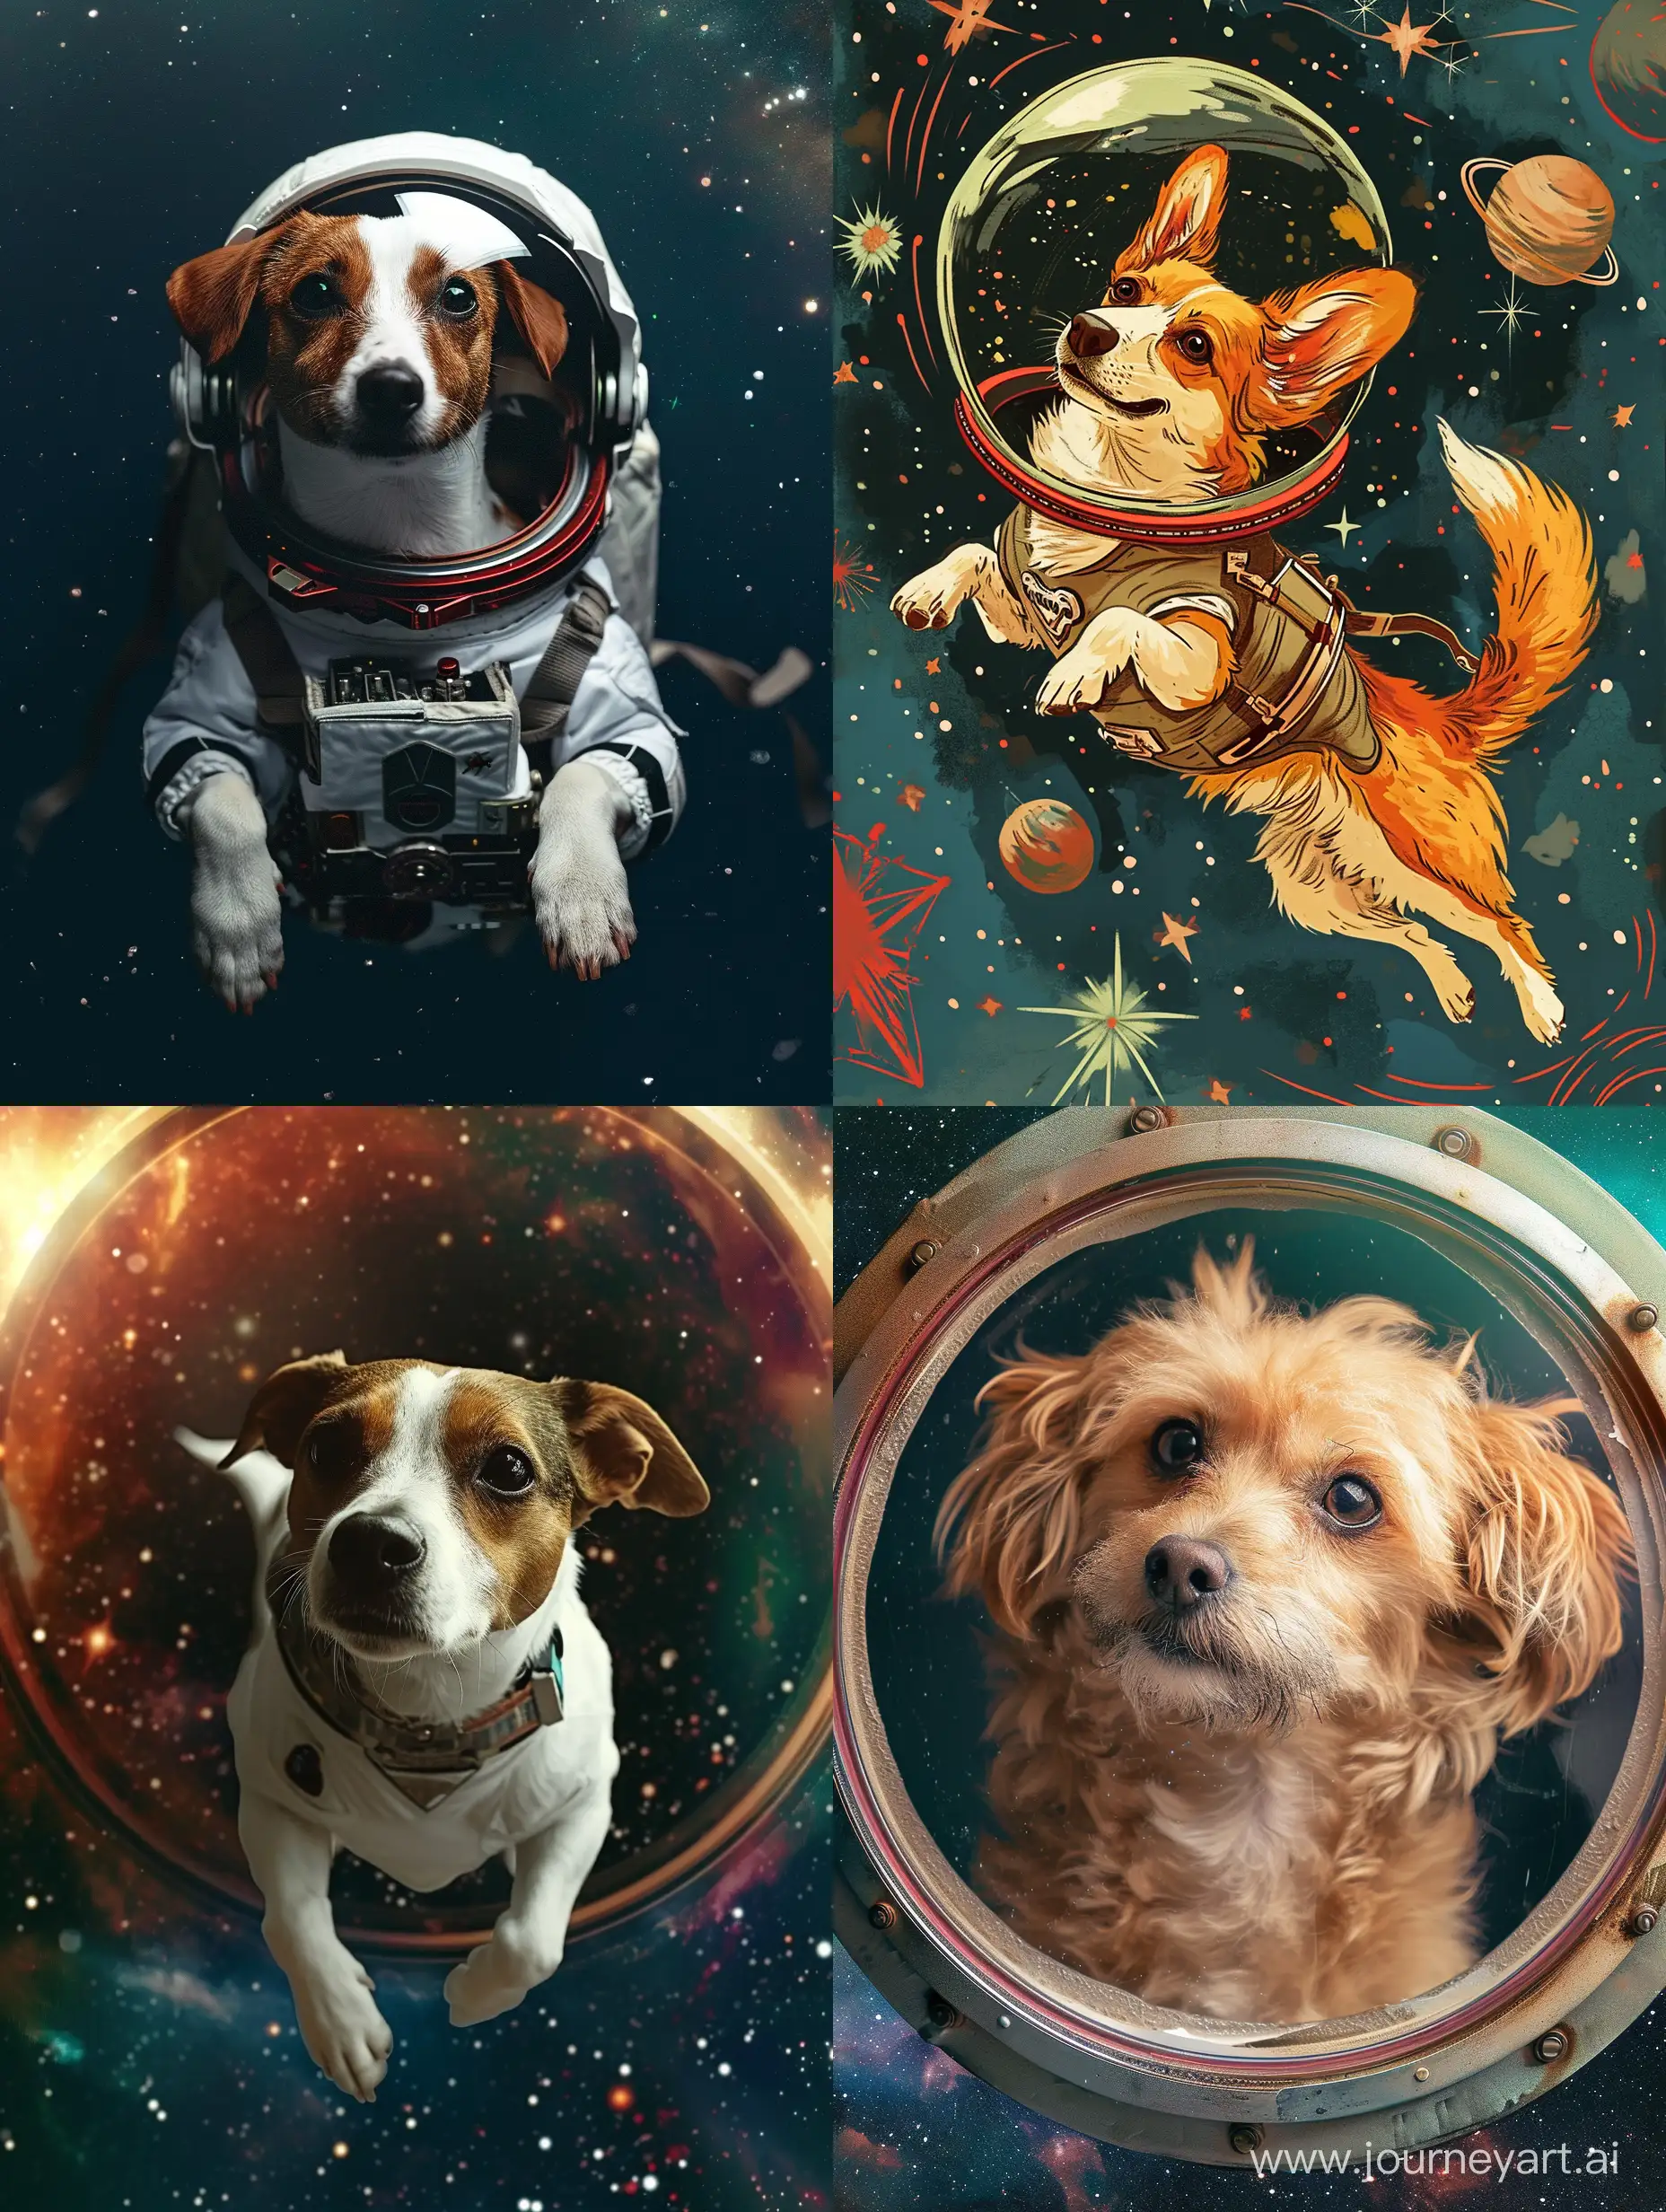 Dog in space
